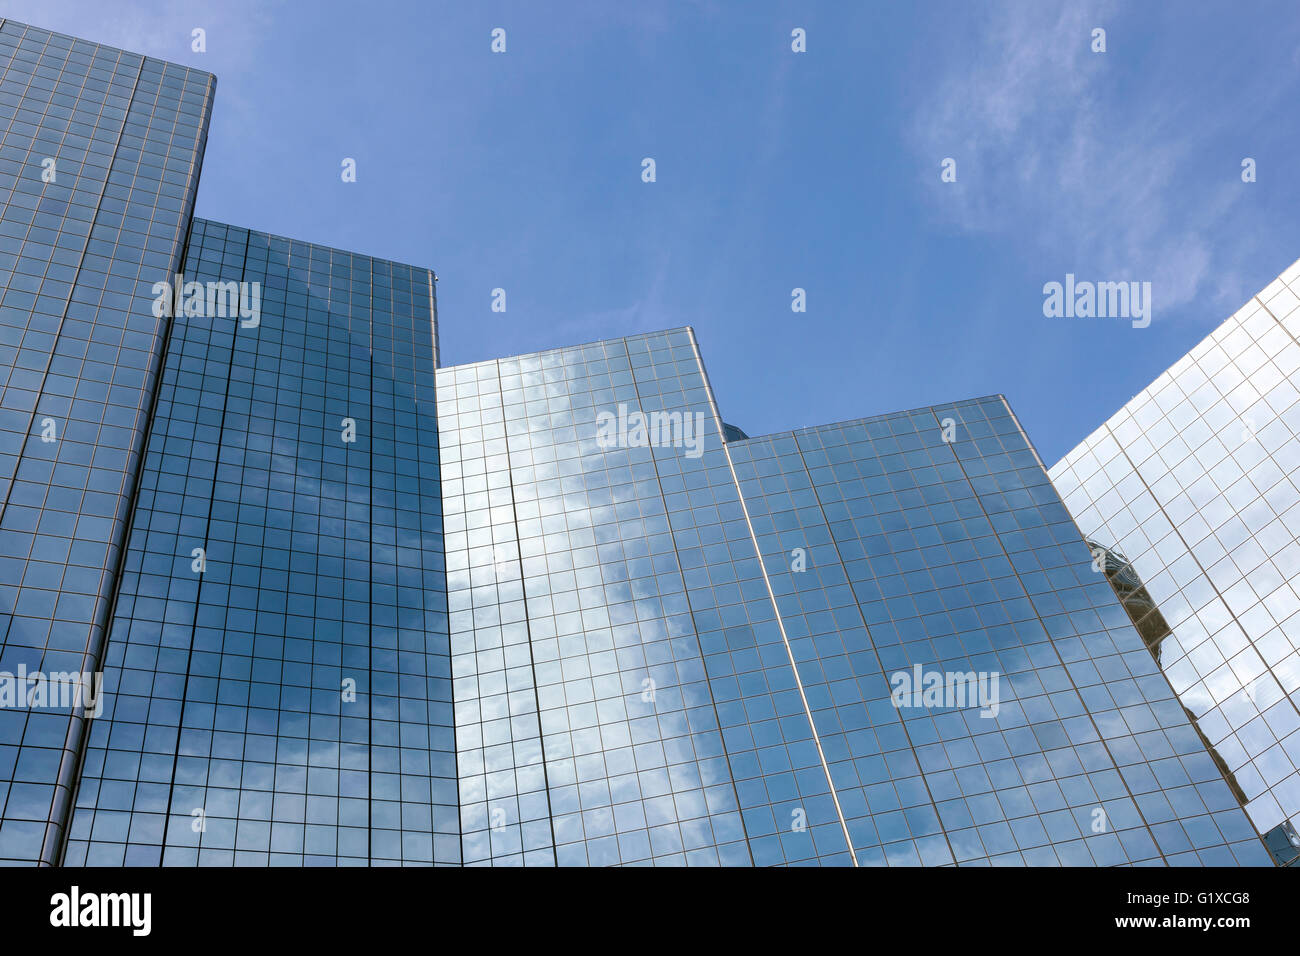 Abstract image of modern highrise buildings in the city Stock Photo